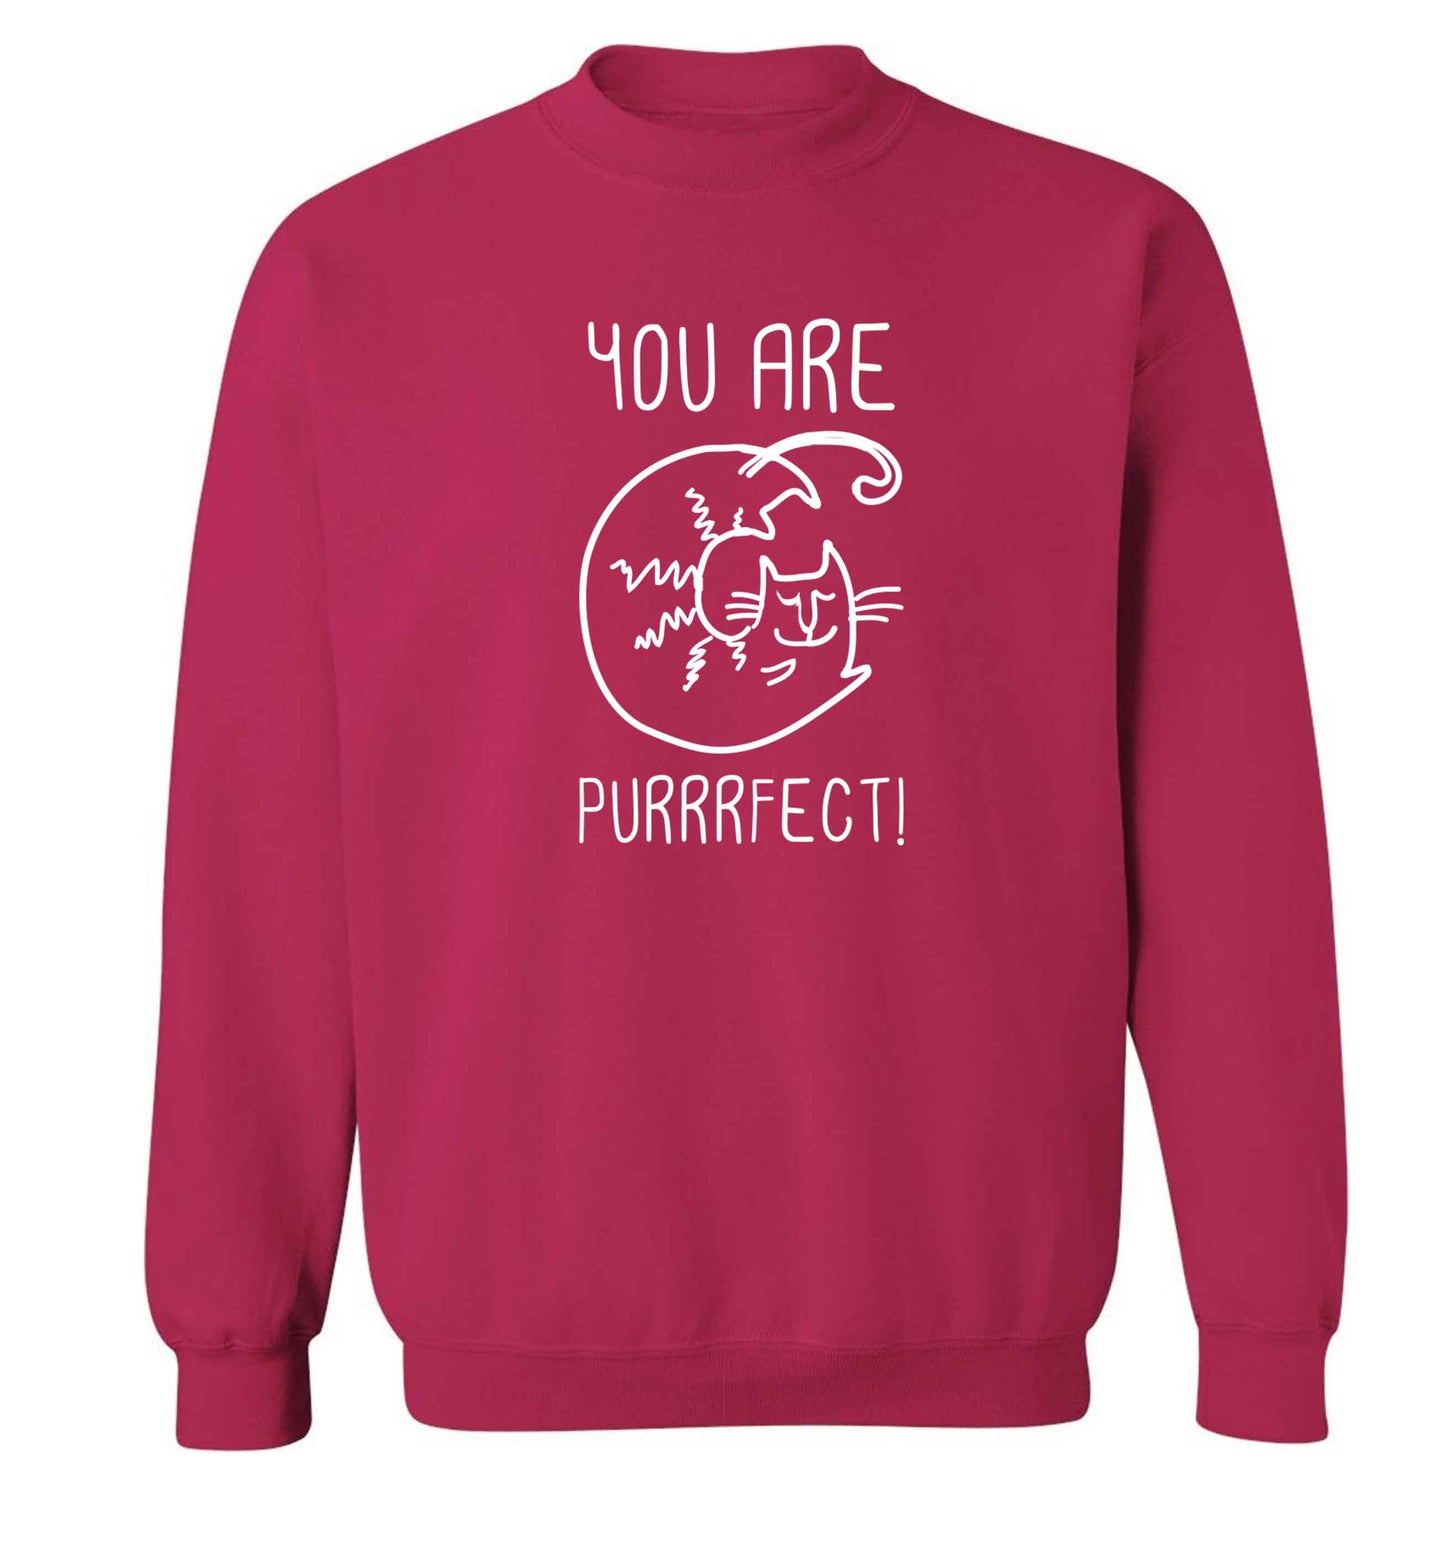 You are purrfect adult's unisex pink sweater 2XL